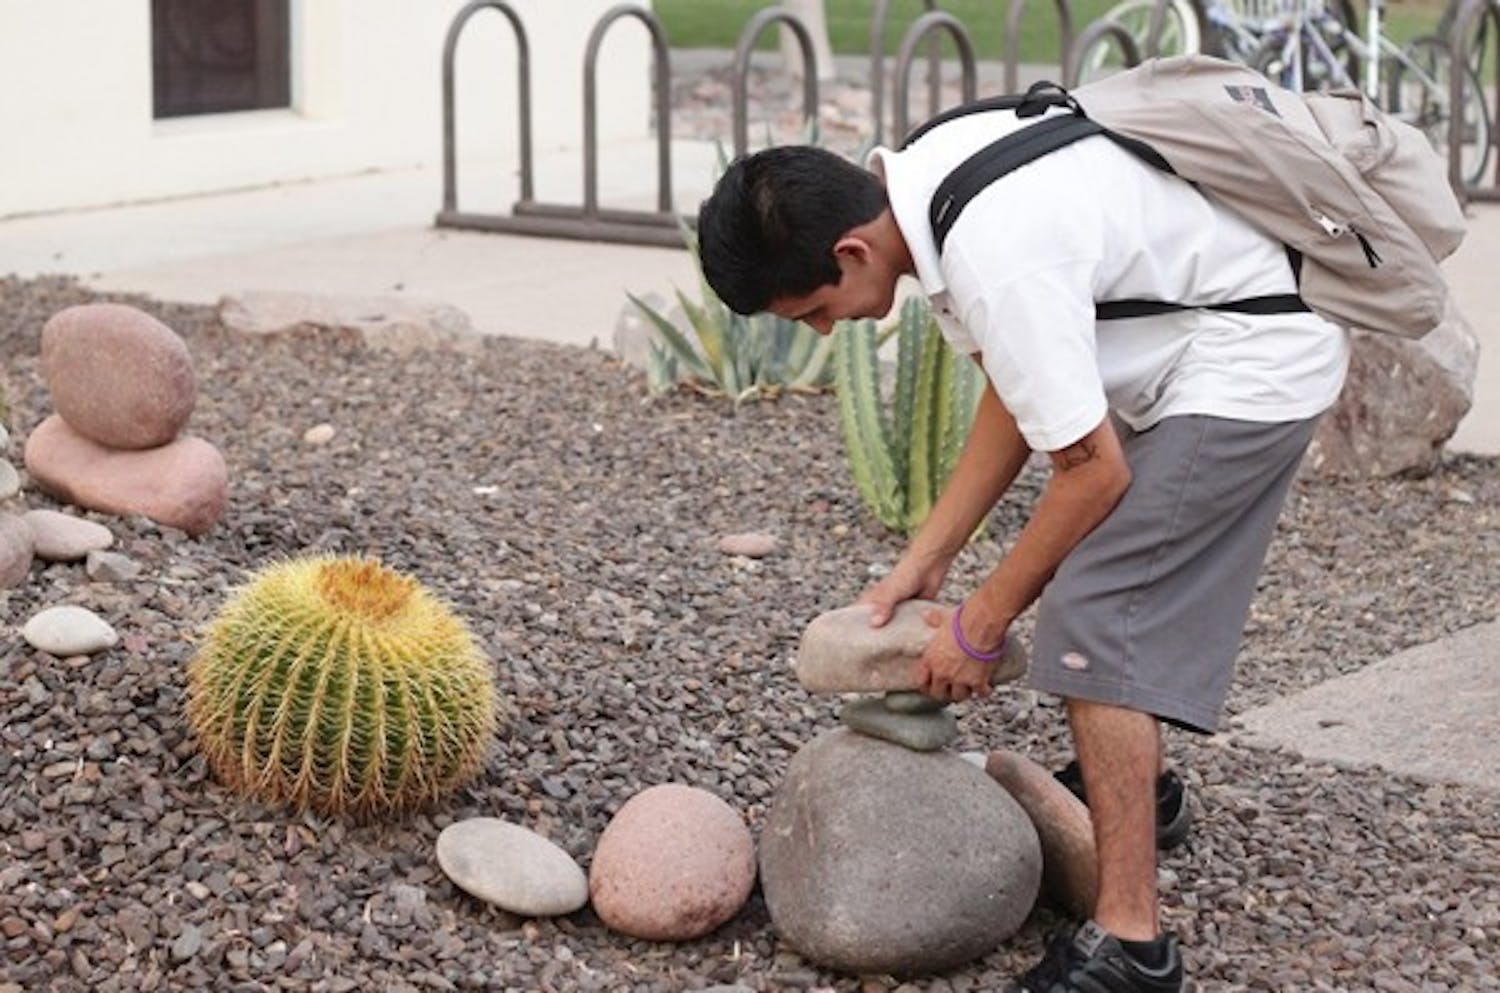 BALANCING ACT: Matthew Bracamonte, an Elementary Education junior, attempts to balance rocks outside the Matthews Center on the Tempe campus. Bracamonte said last year he used to knock the rocks down and so this semester he decided he would try to stack them up. (Photo by Beth Easterbrook)